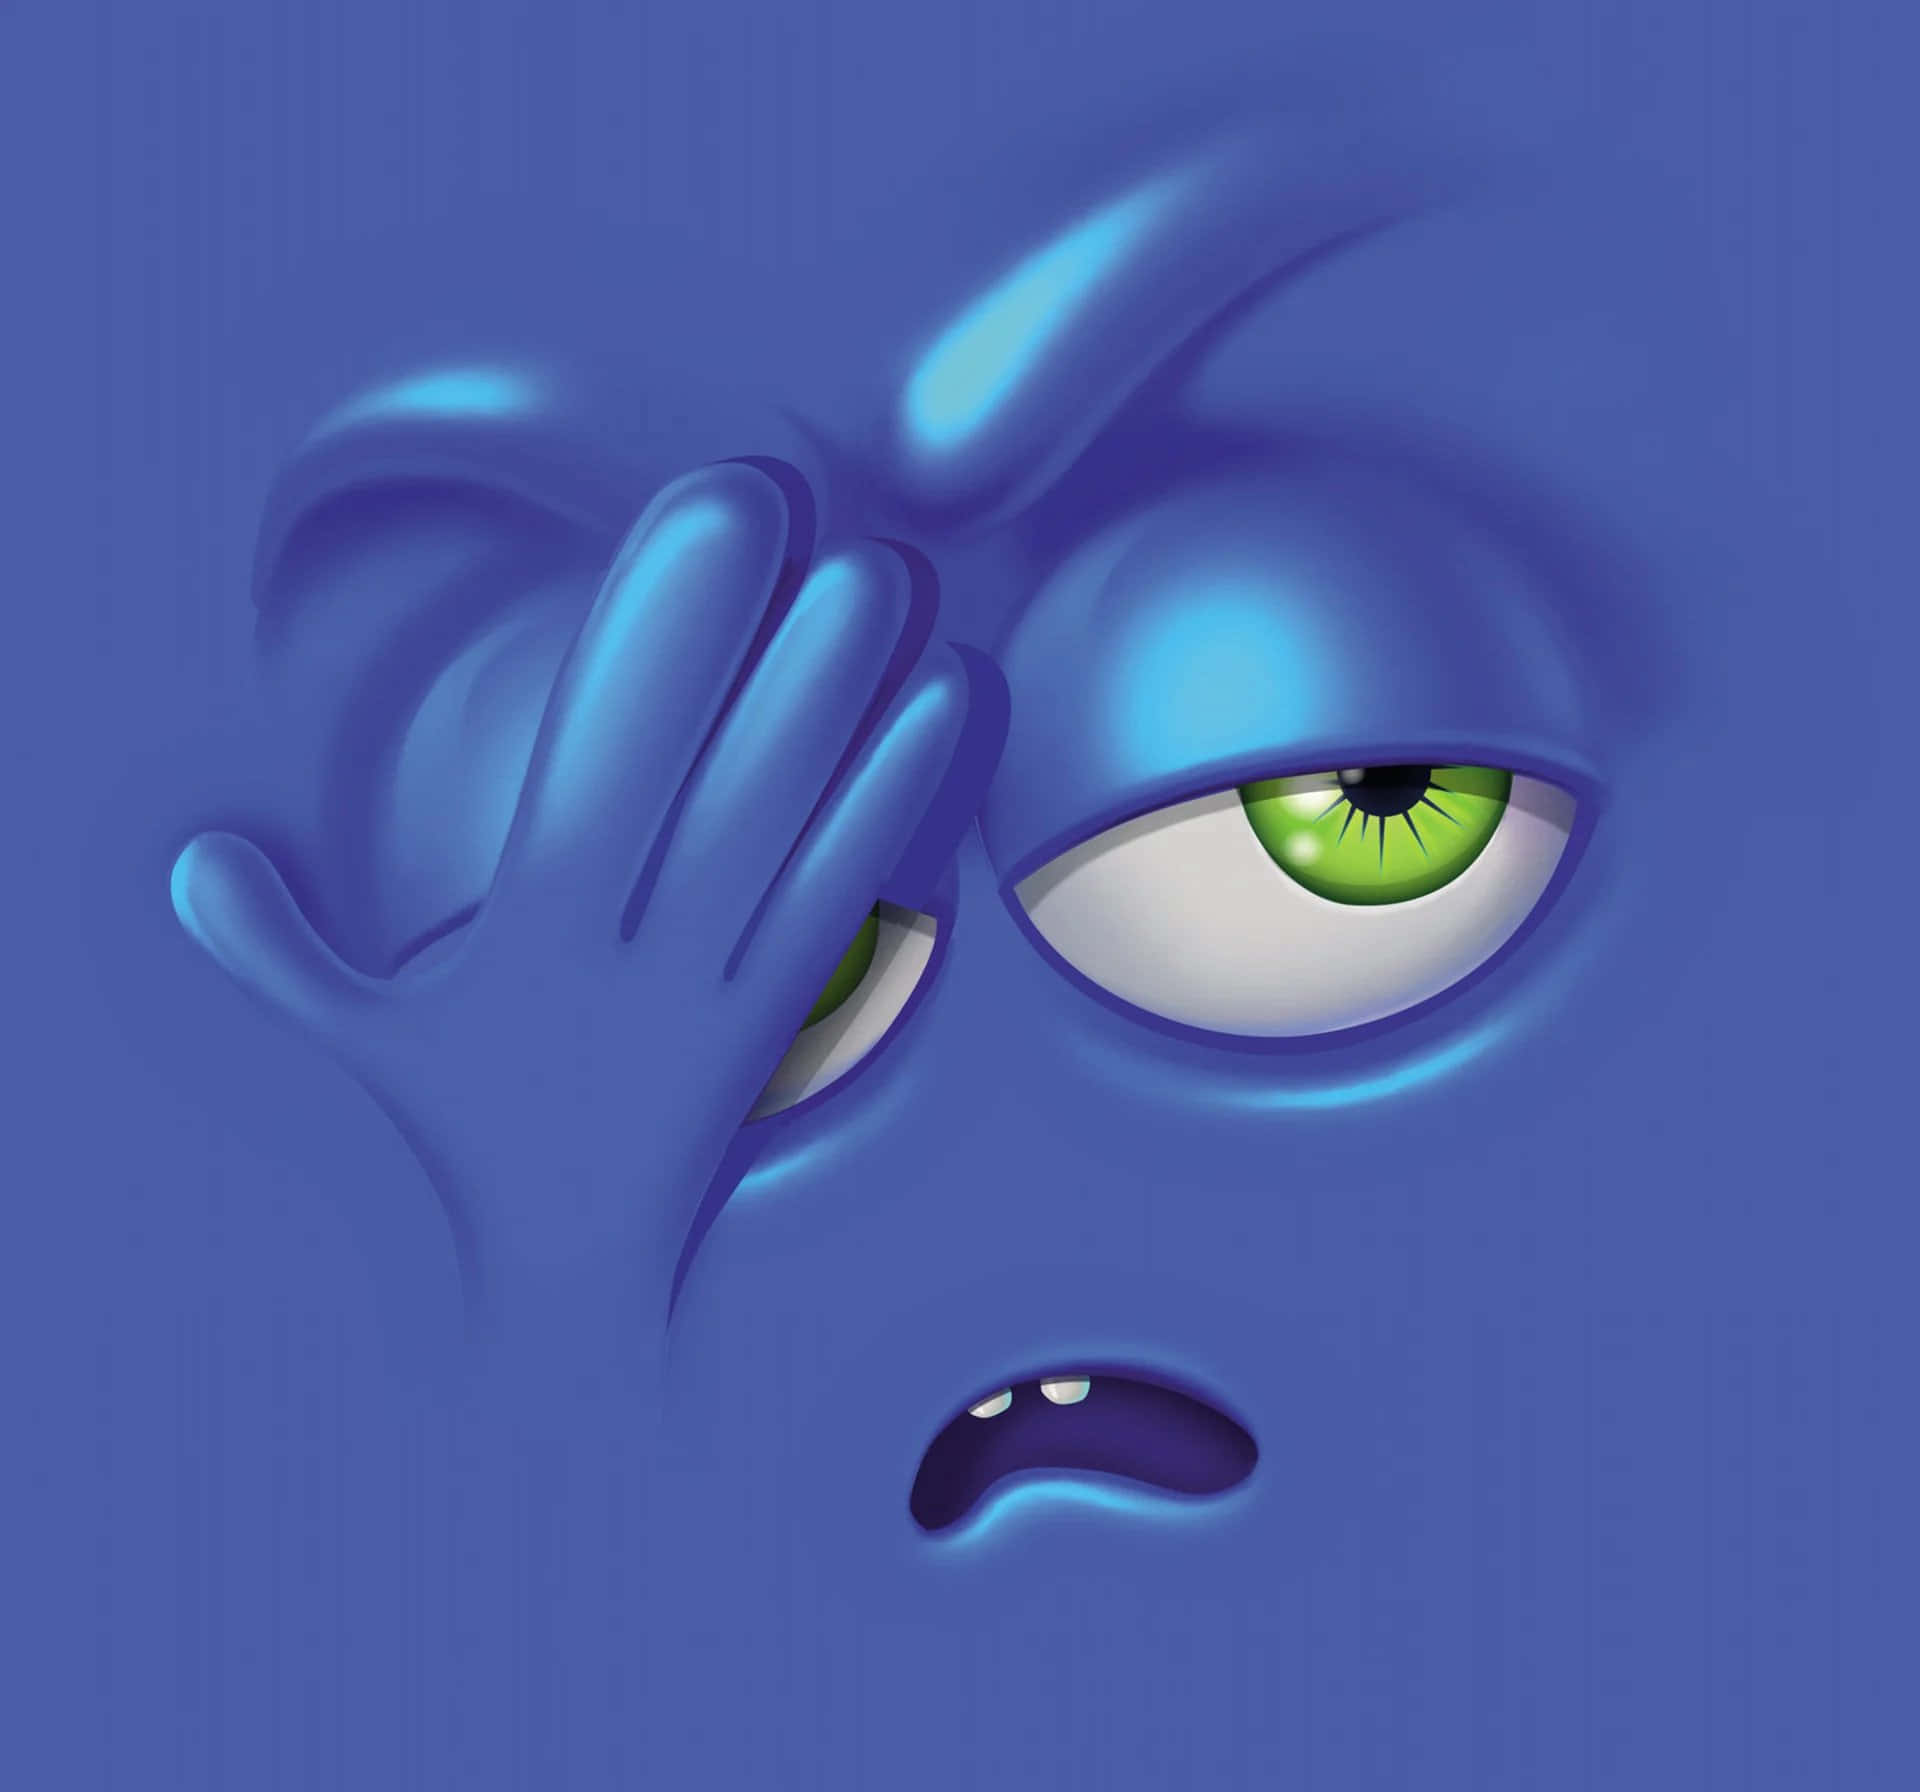 A Blue Face With Green Eyes Covering Its Face